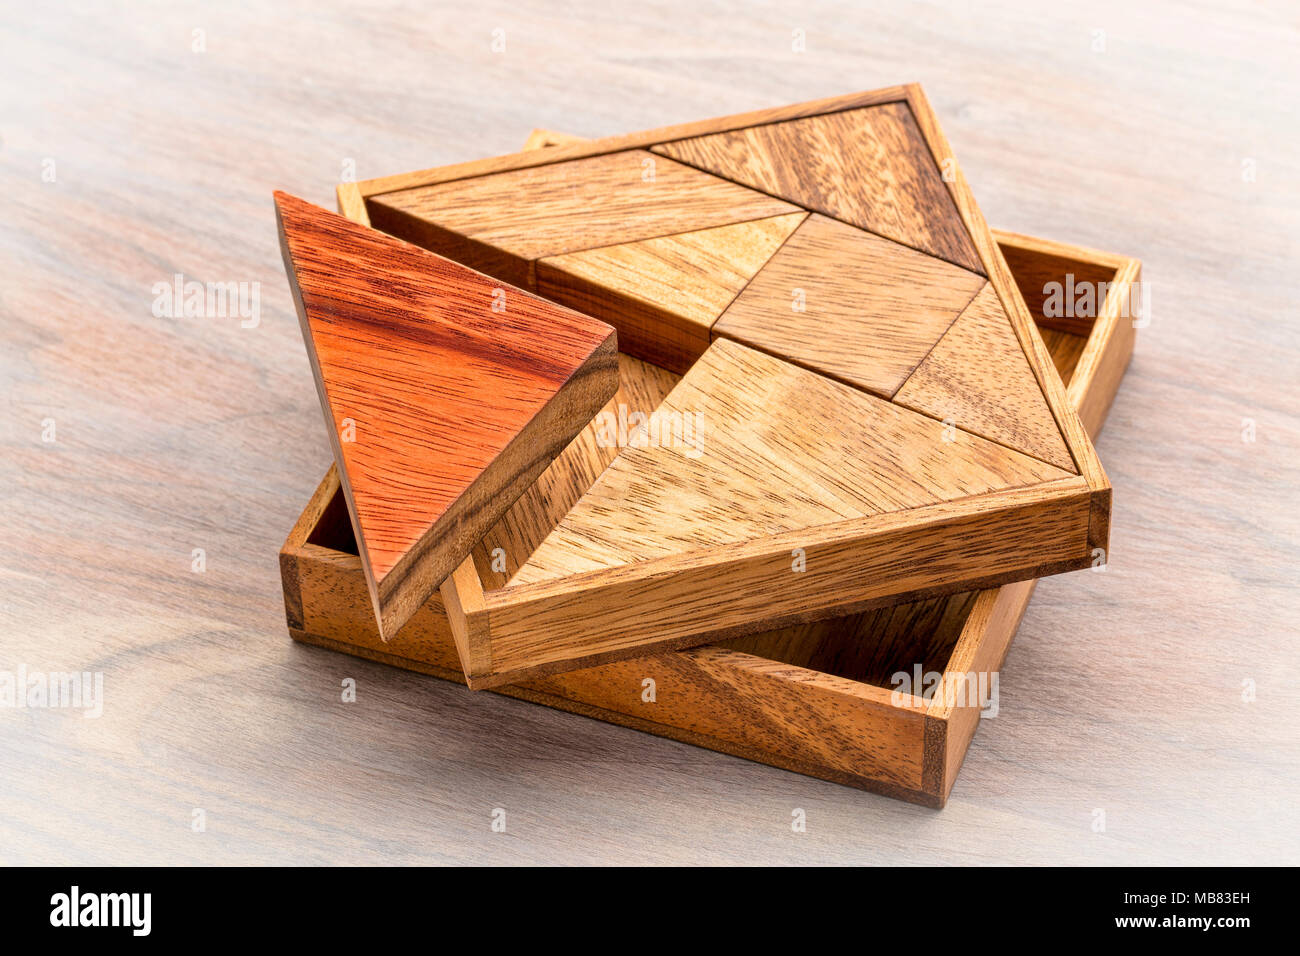 Tangram, a traditional Chinese Puzzle Game made of different wood parts to  build abstract figures from them Stock Photo - Alamy